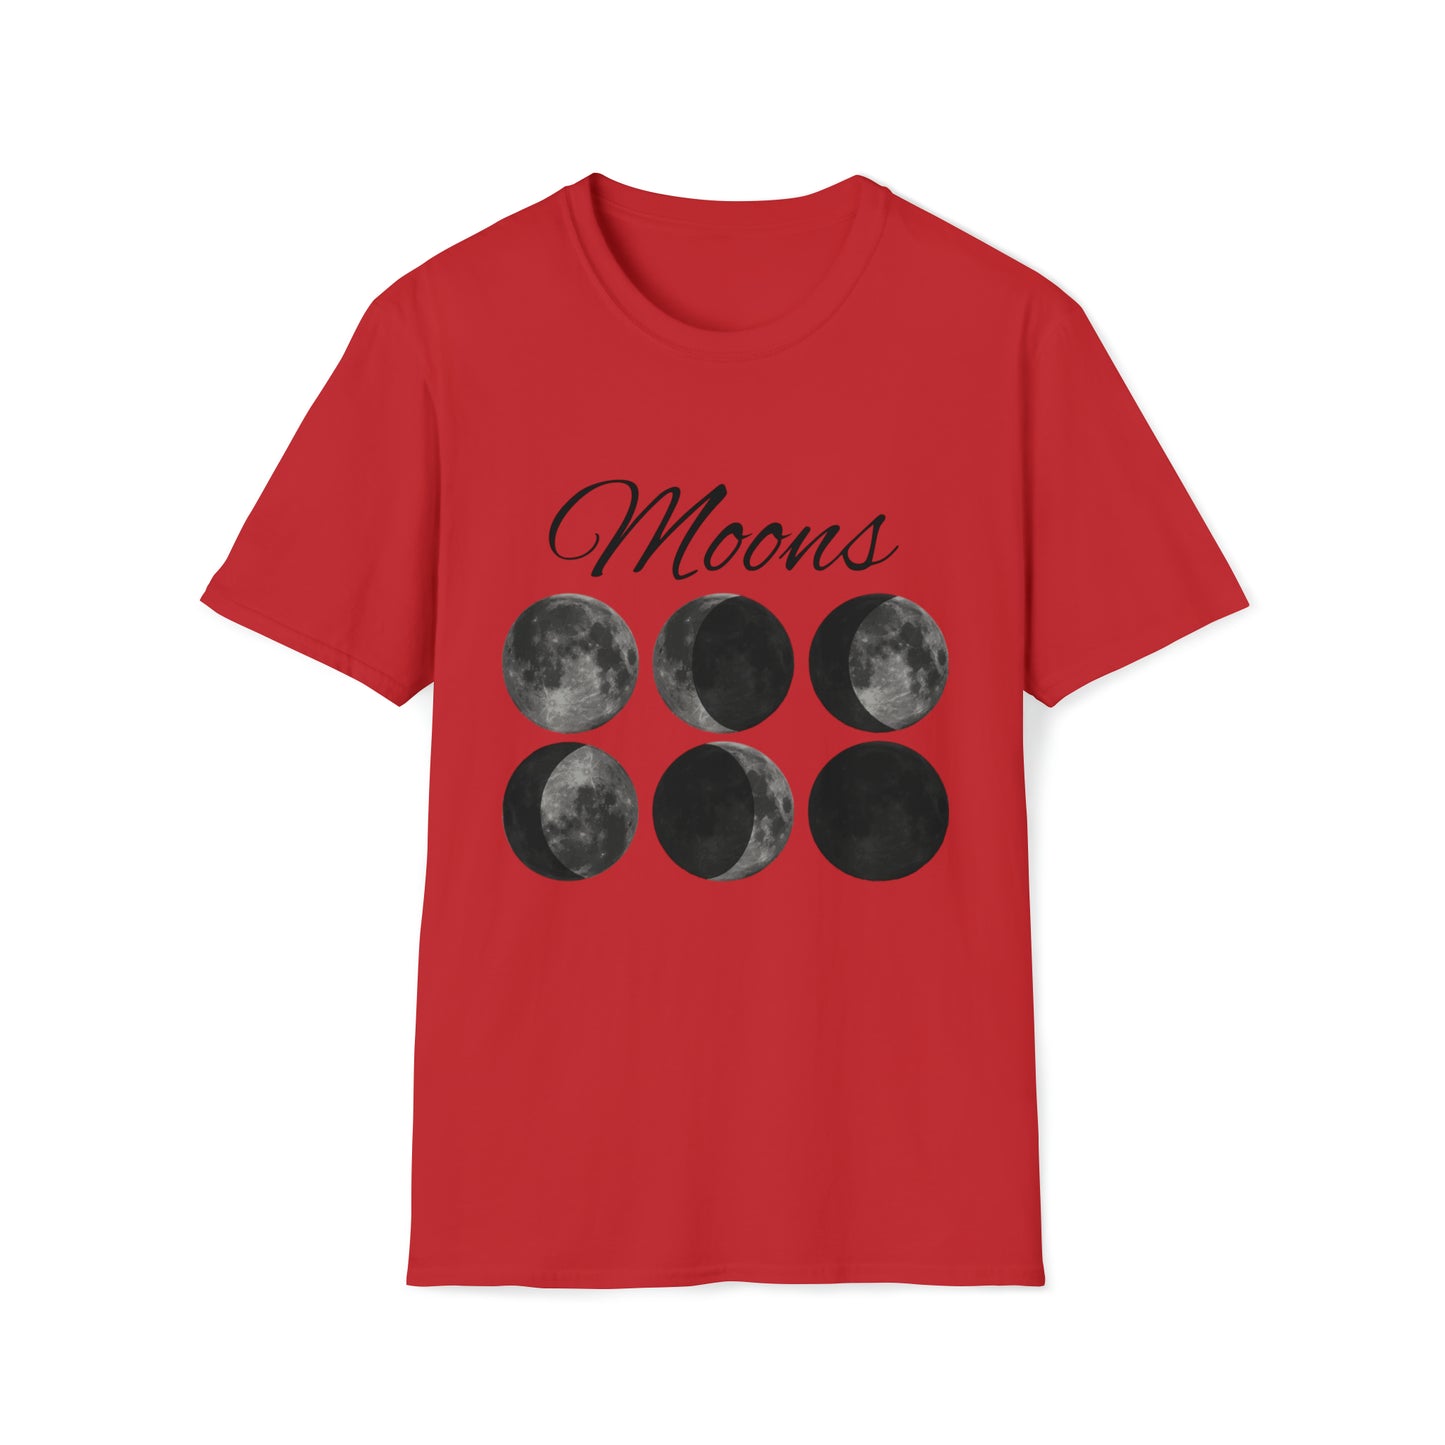 Moons Astrology 001 - Unisex Softstyle T-Shirt